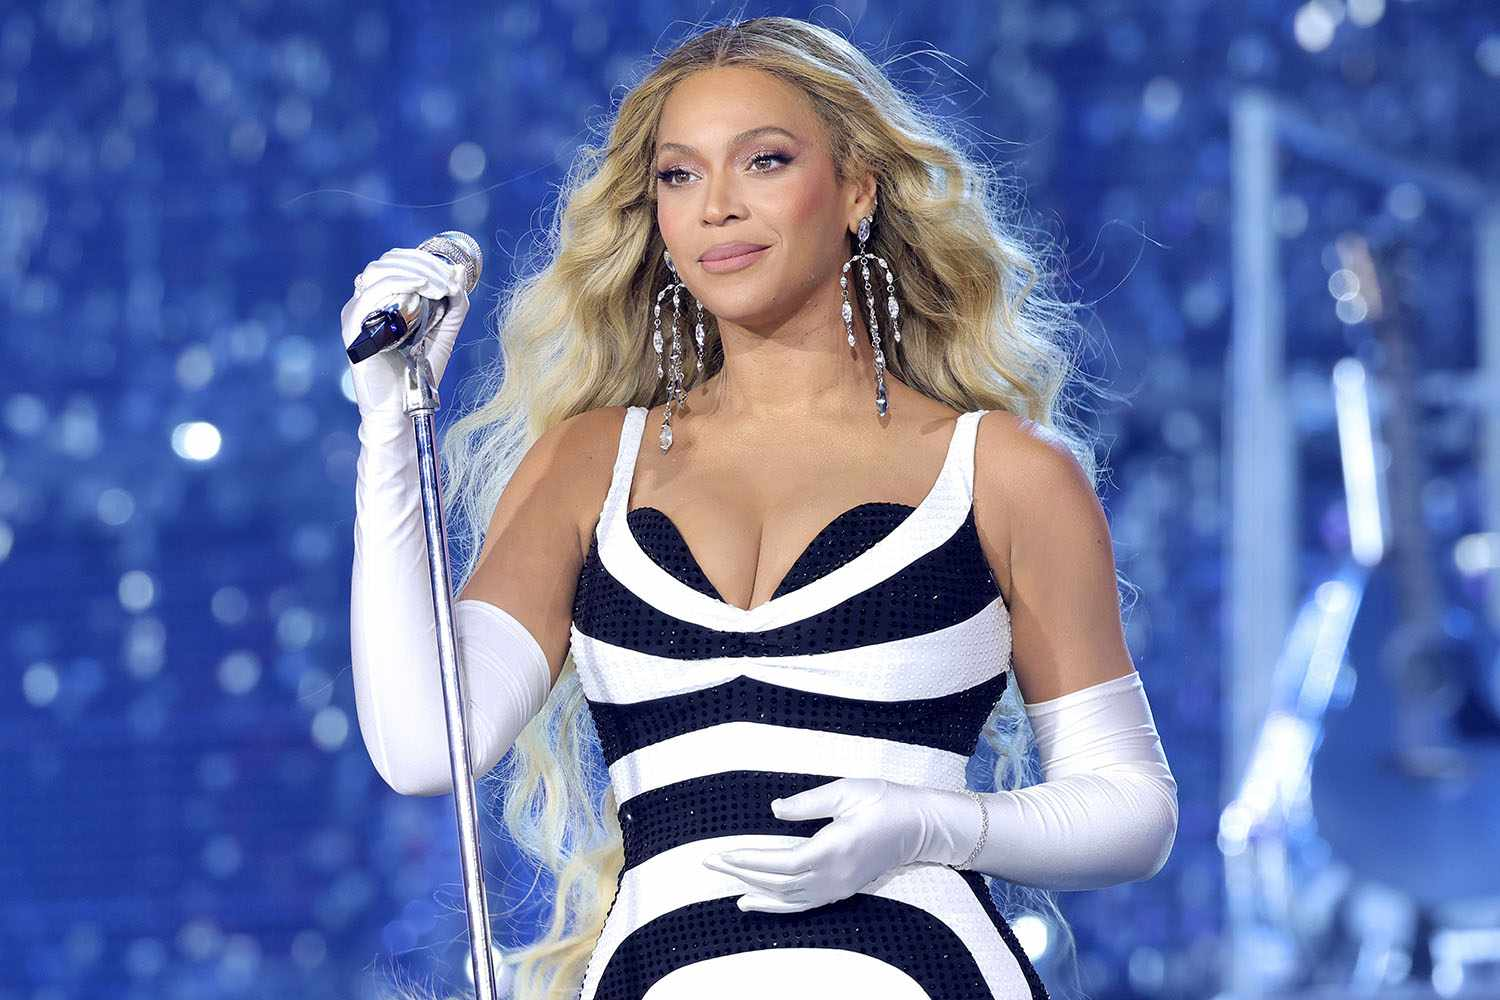 Beyoncé Makes History as First Black Woman to Lead Billboard’s Country Songs Chart with “Texas Hold ‘Em-thumnail